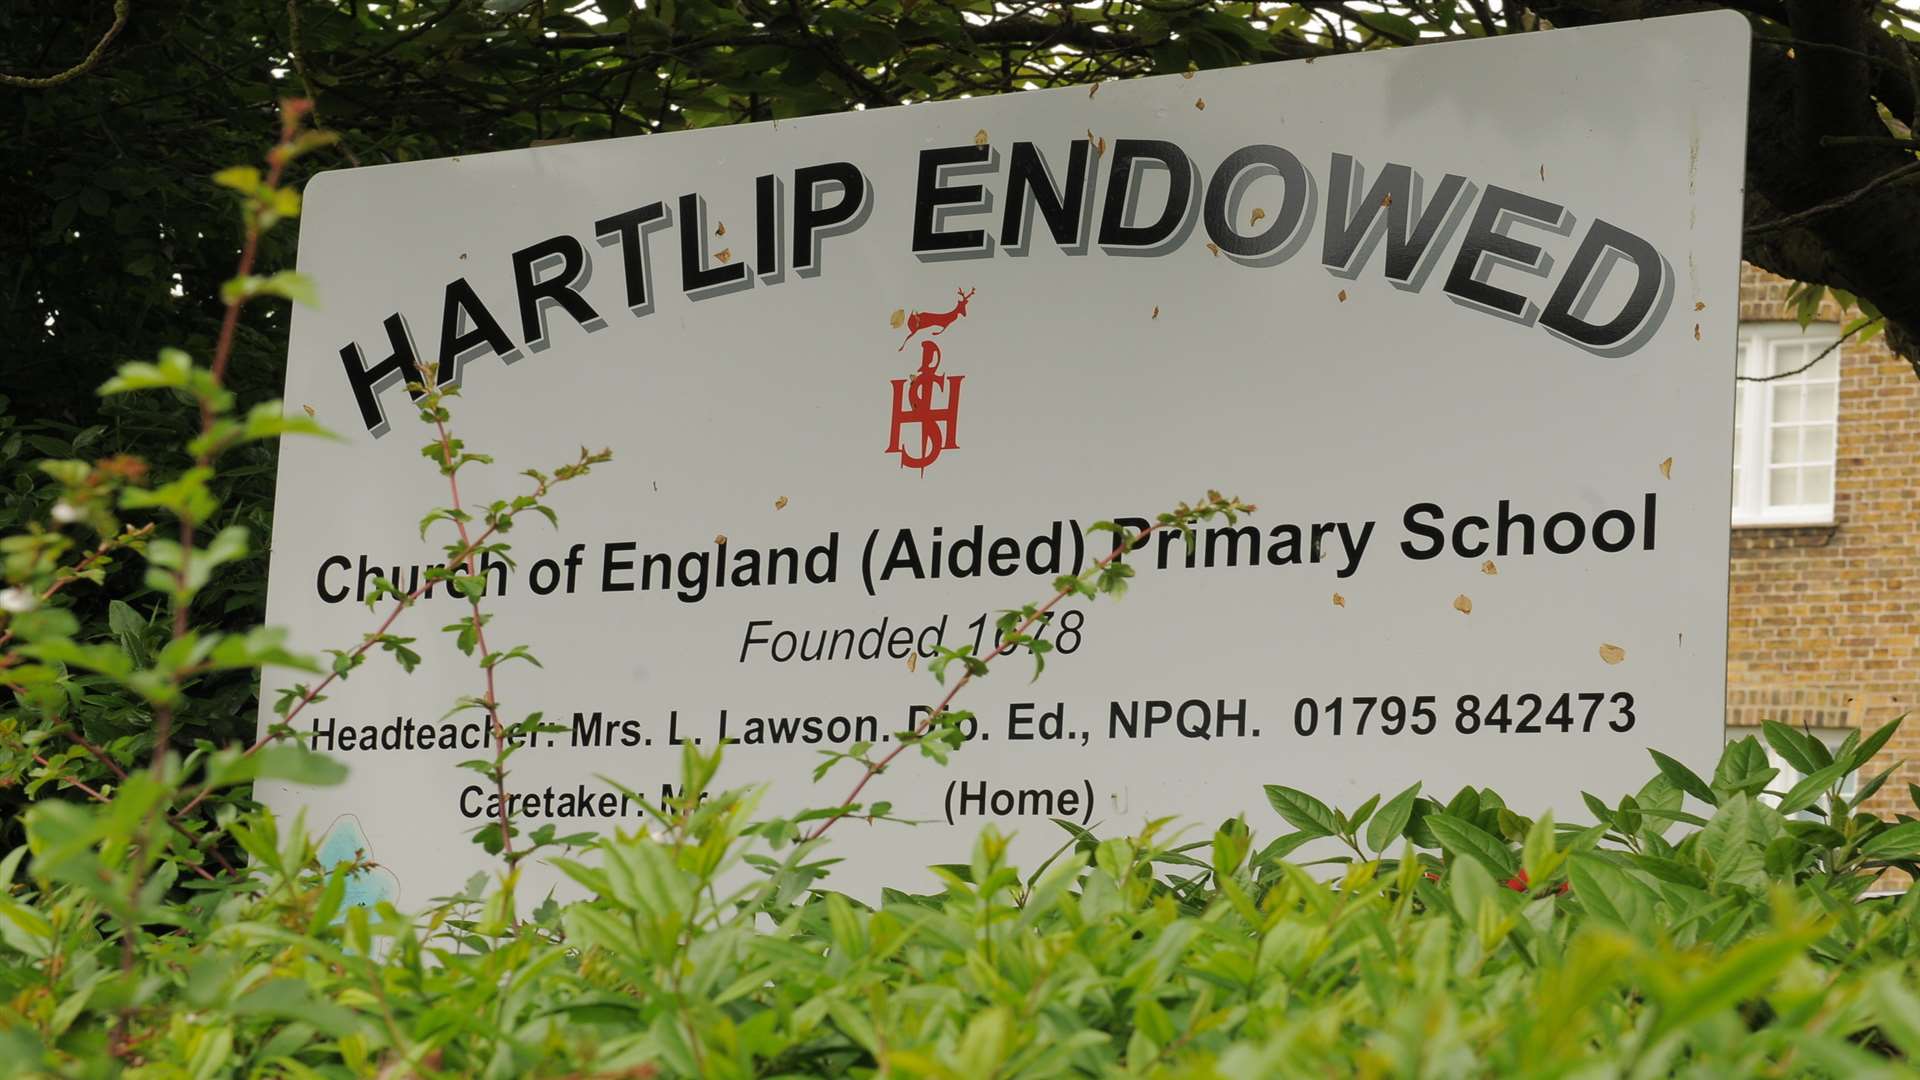 Hartlip Primary School was targeted in a similar way